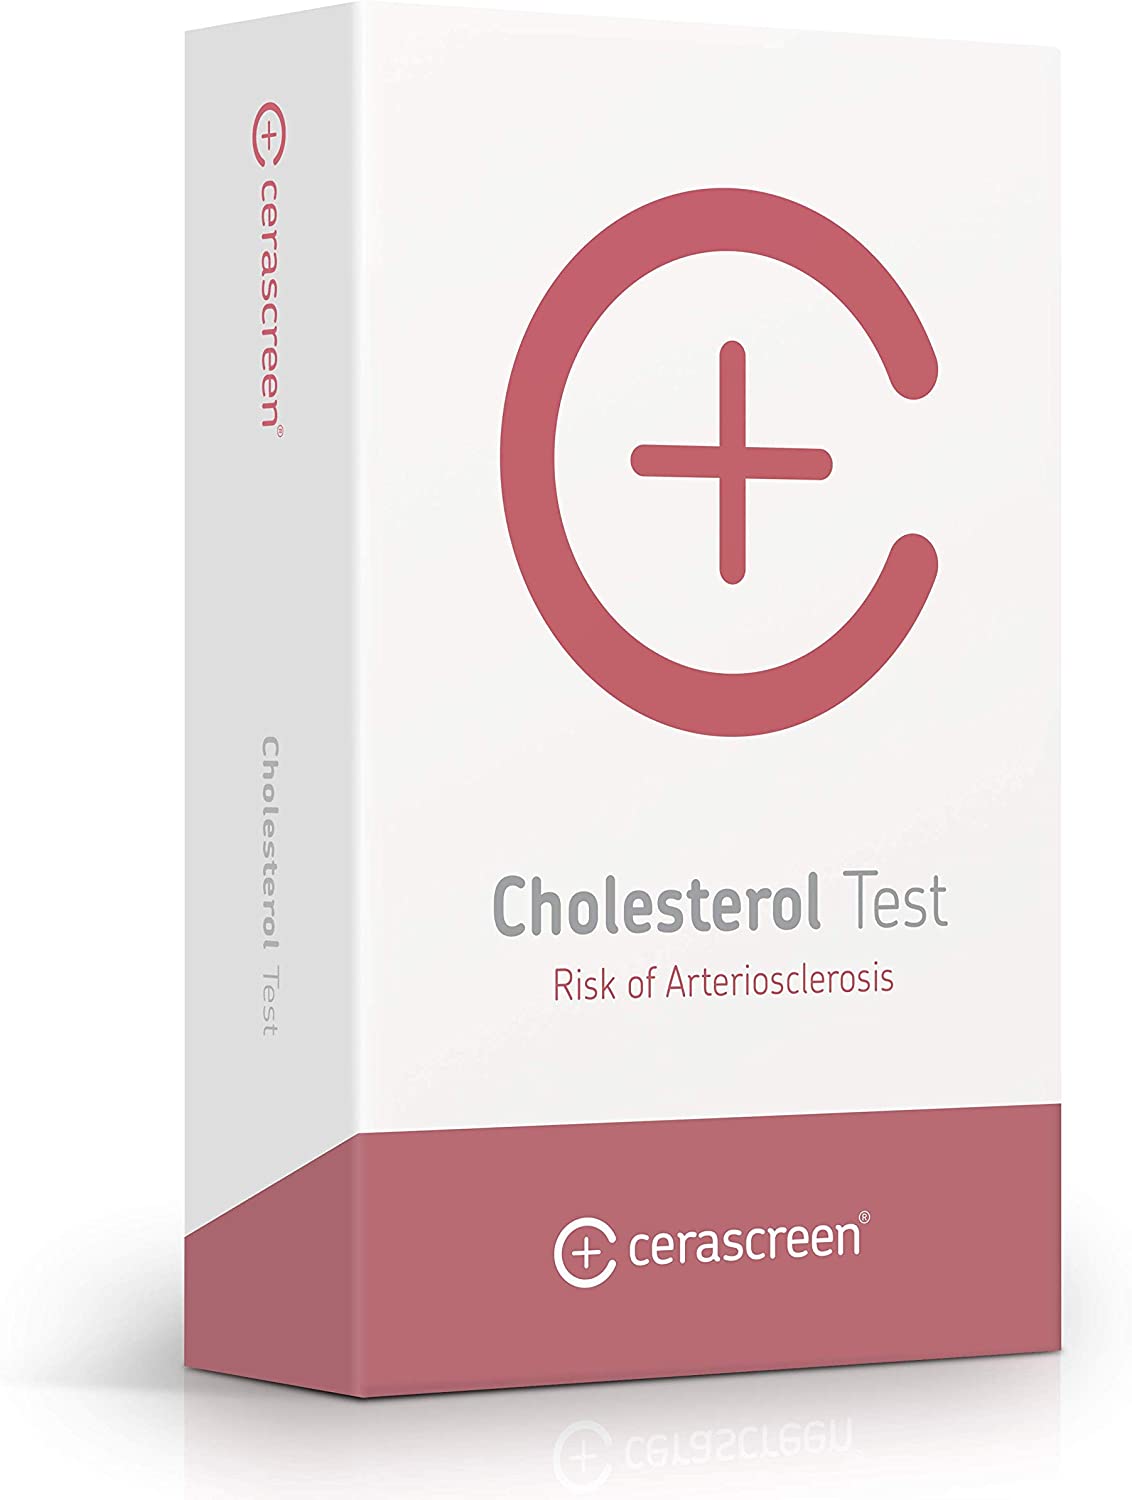 cerascreen® Cholesterol Test – Determine Your HDL, LDL, Total Cholesterol, Triglycerides and The LDL/HDL Ratio Quick & Easy from Home | Health.